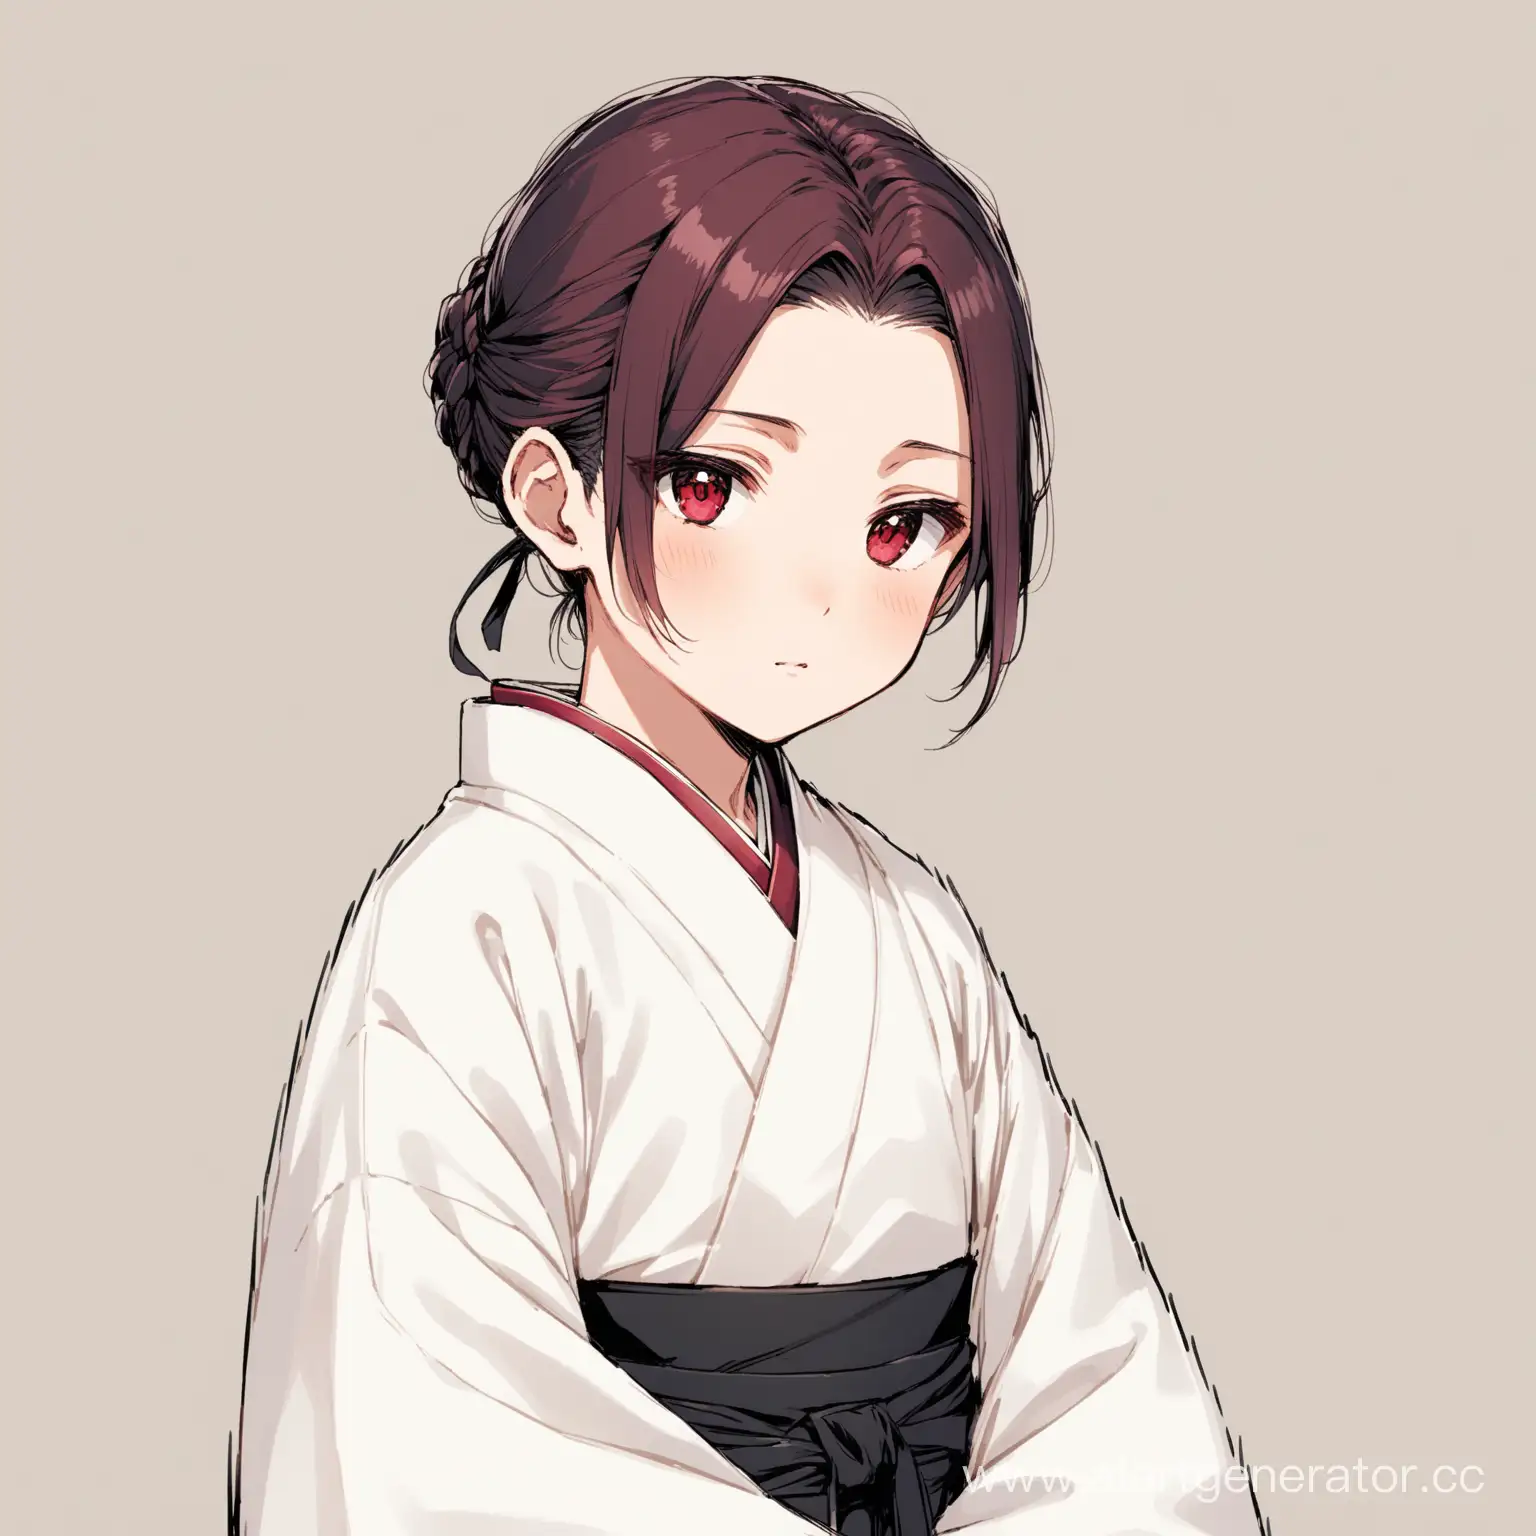 A boy, ruby-red eyes. Hair white long and tied in a low bun parted fringes on his head, a pretty even feminine face, Very thin for his age, and a weak-looking complexion. He is dressed in a white kimono, a white juban, a white haori that is several times larger than the boy himself, black hakama trousers, white tabis, and dzori. 